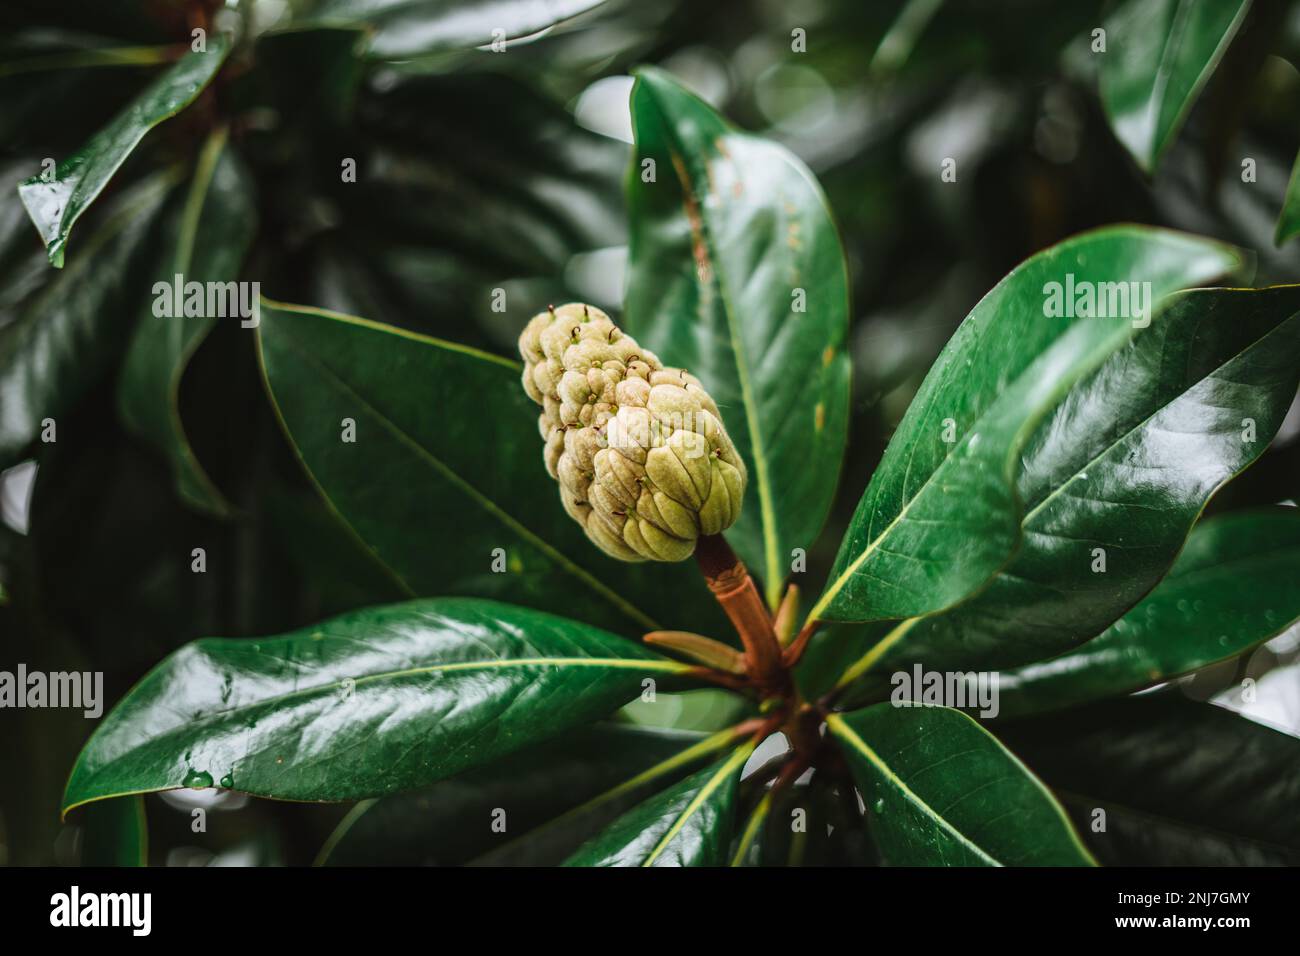 Seed and fruit of a magnolia tree with green leaves background Stock Photo